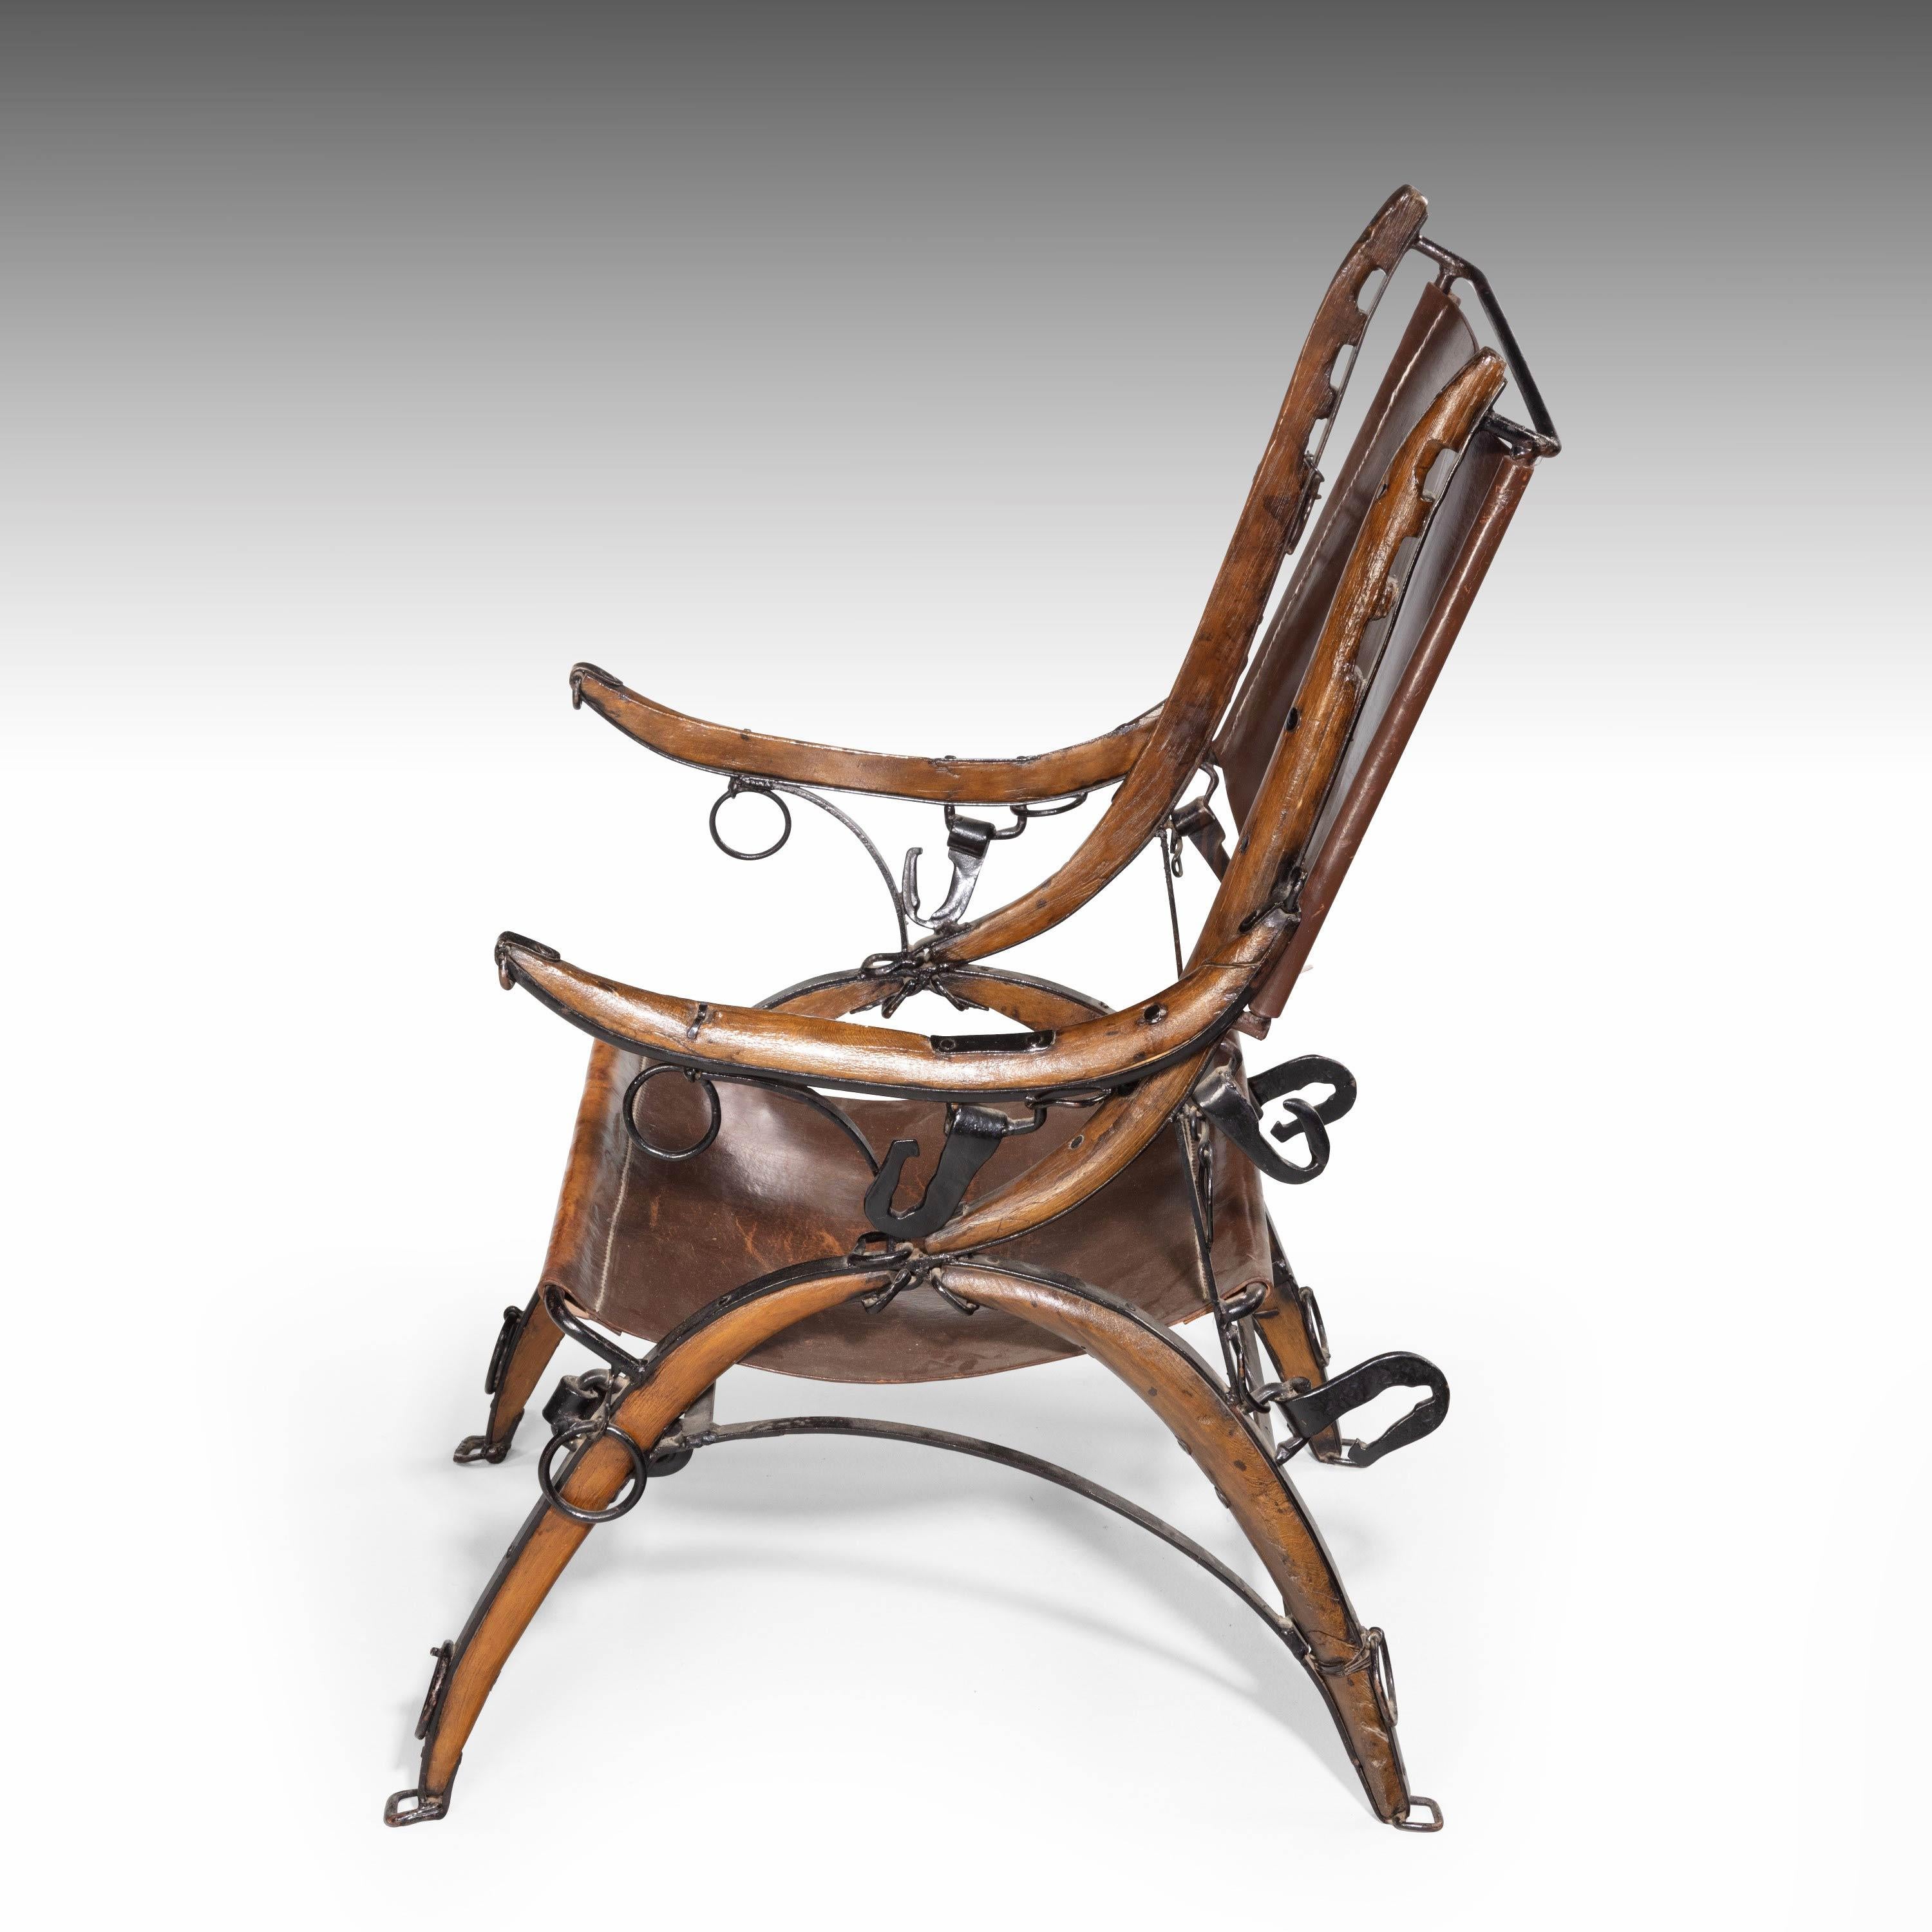 A most unusual and rare chair constructed from horse hames. With a fine leather back and seat.
Measures: Seat height 14